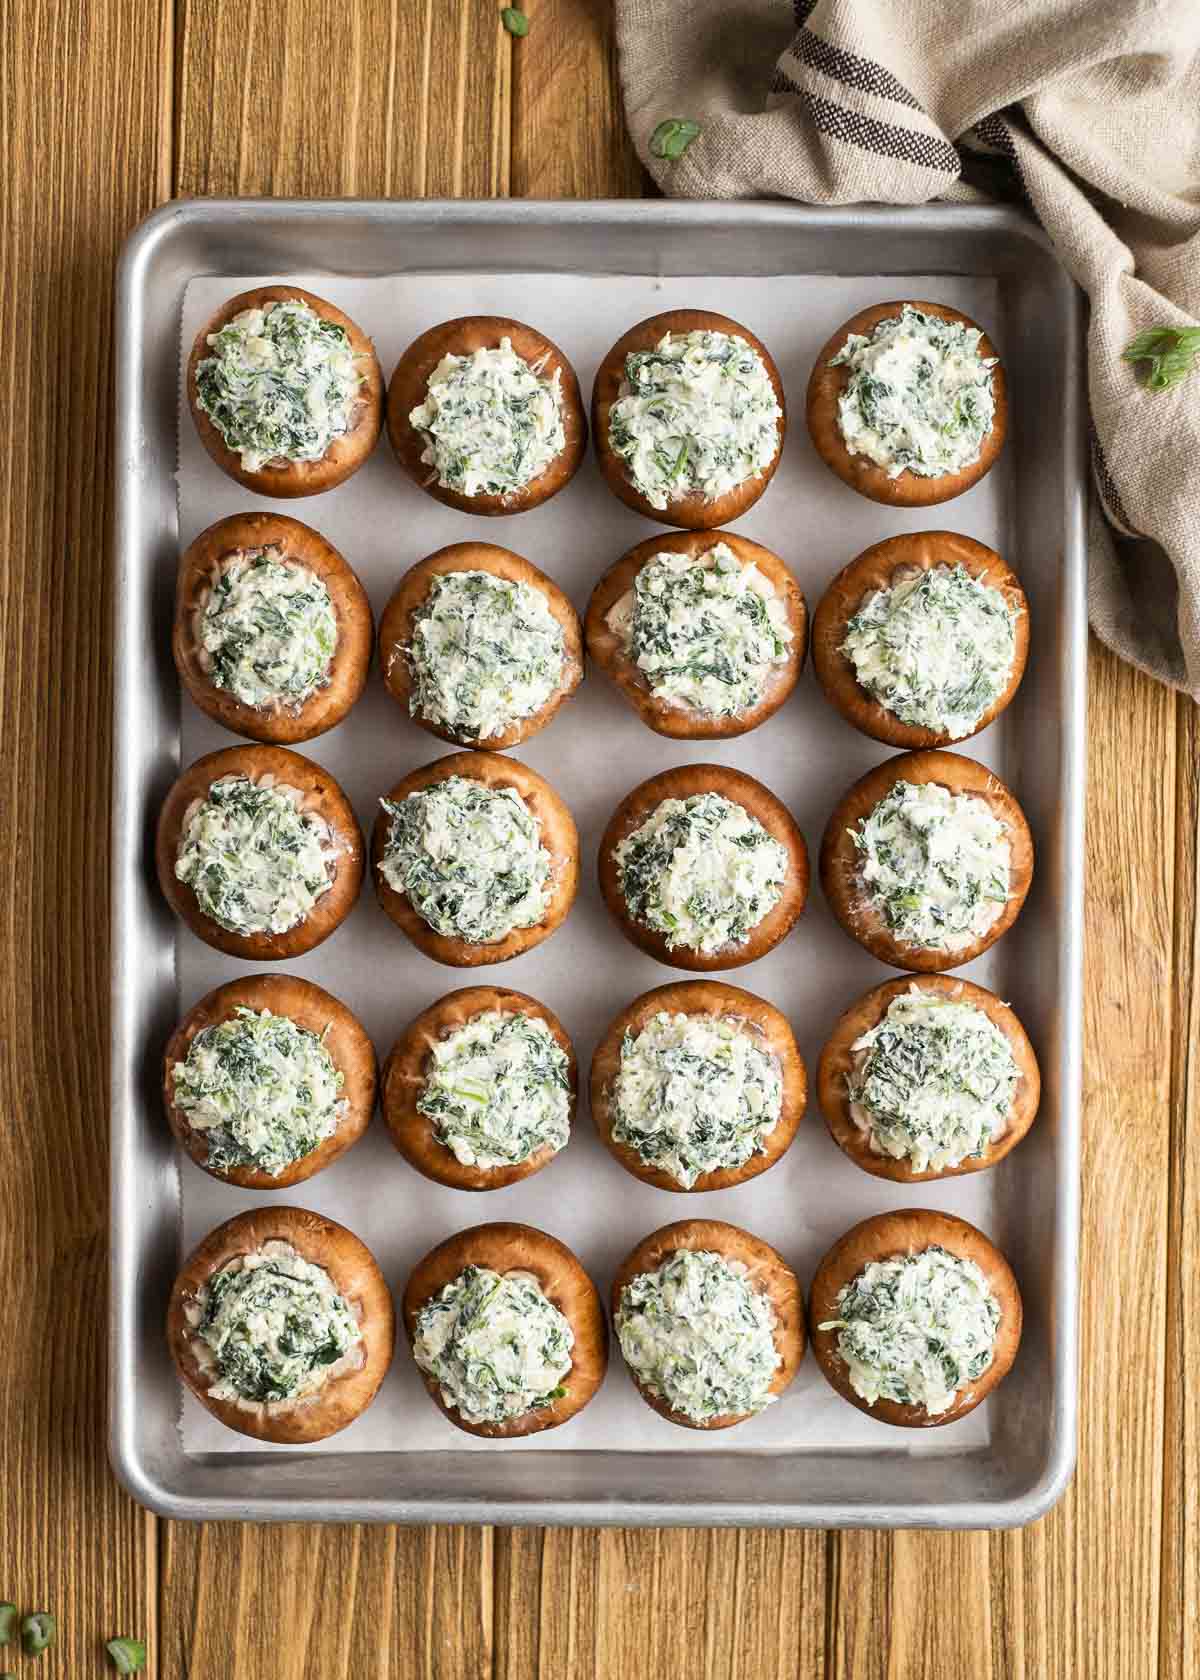 20 baby bella mushrooms stuffed with a spinach and cheese mixture on a lined baking pan